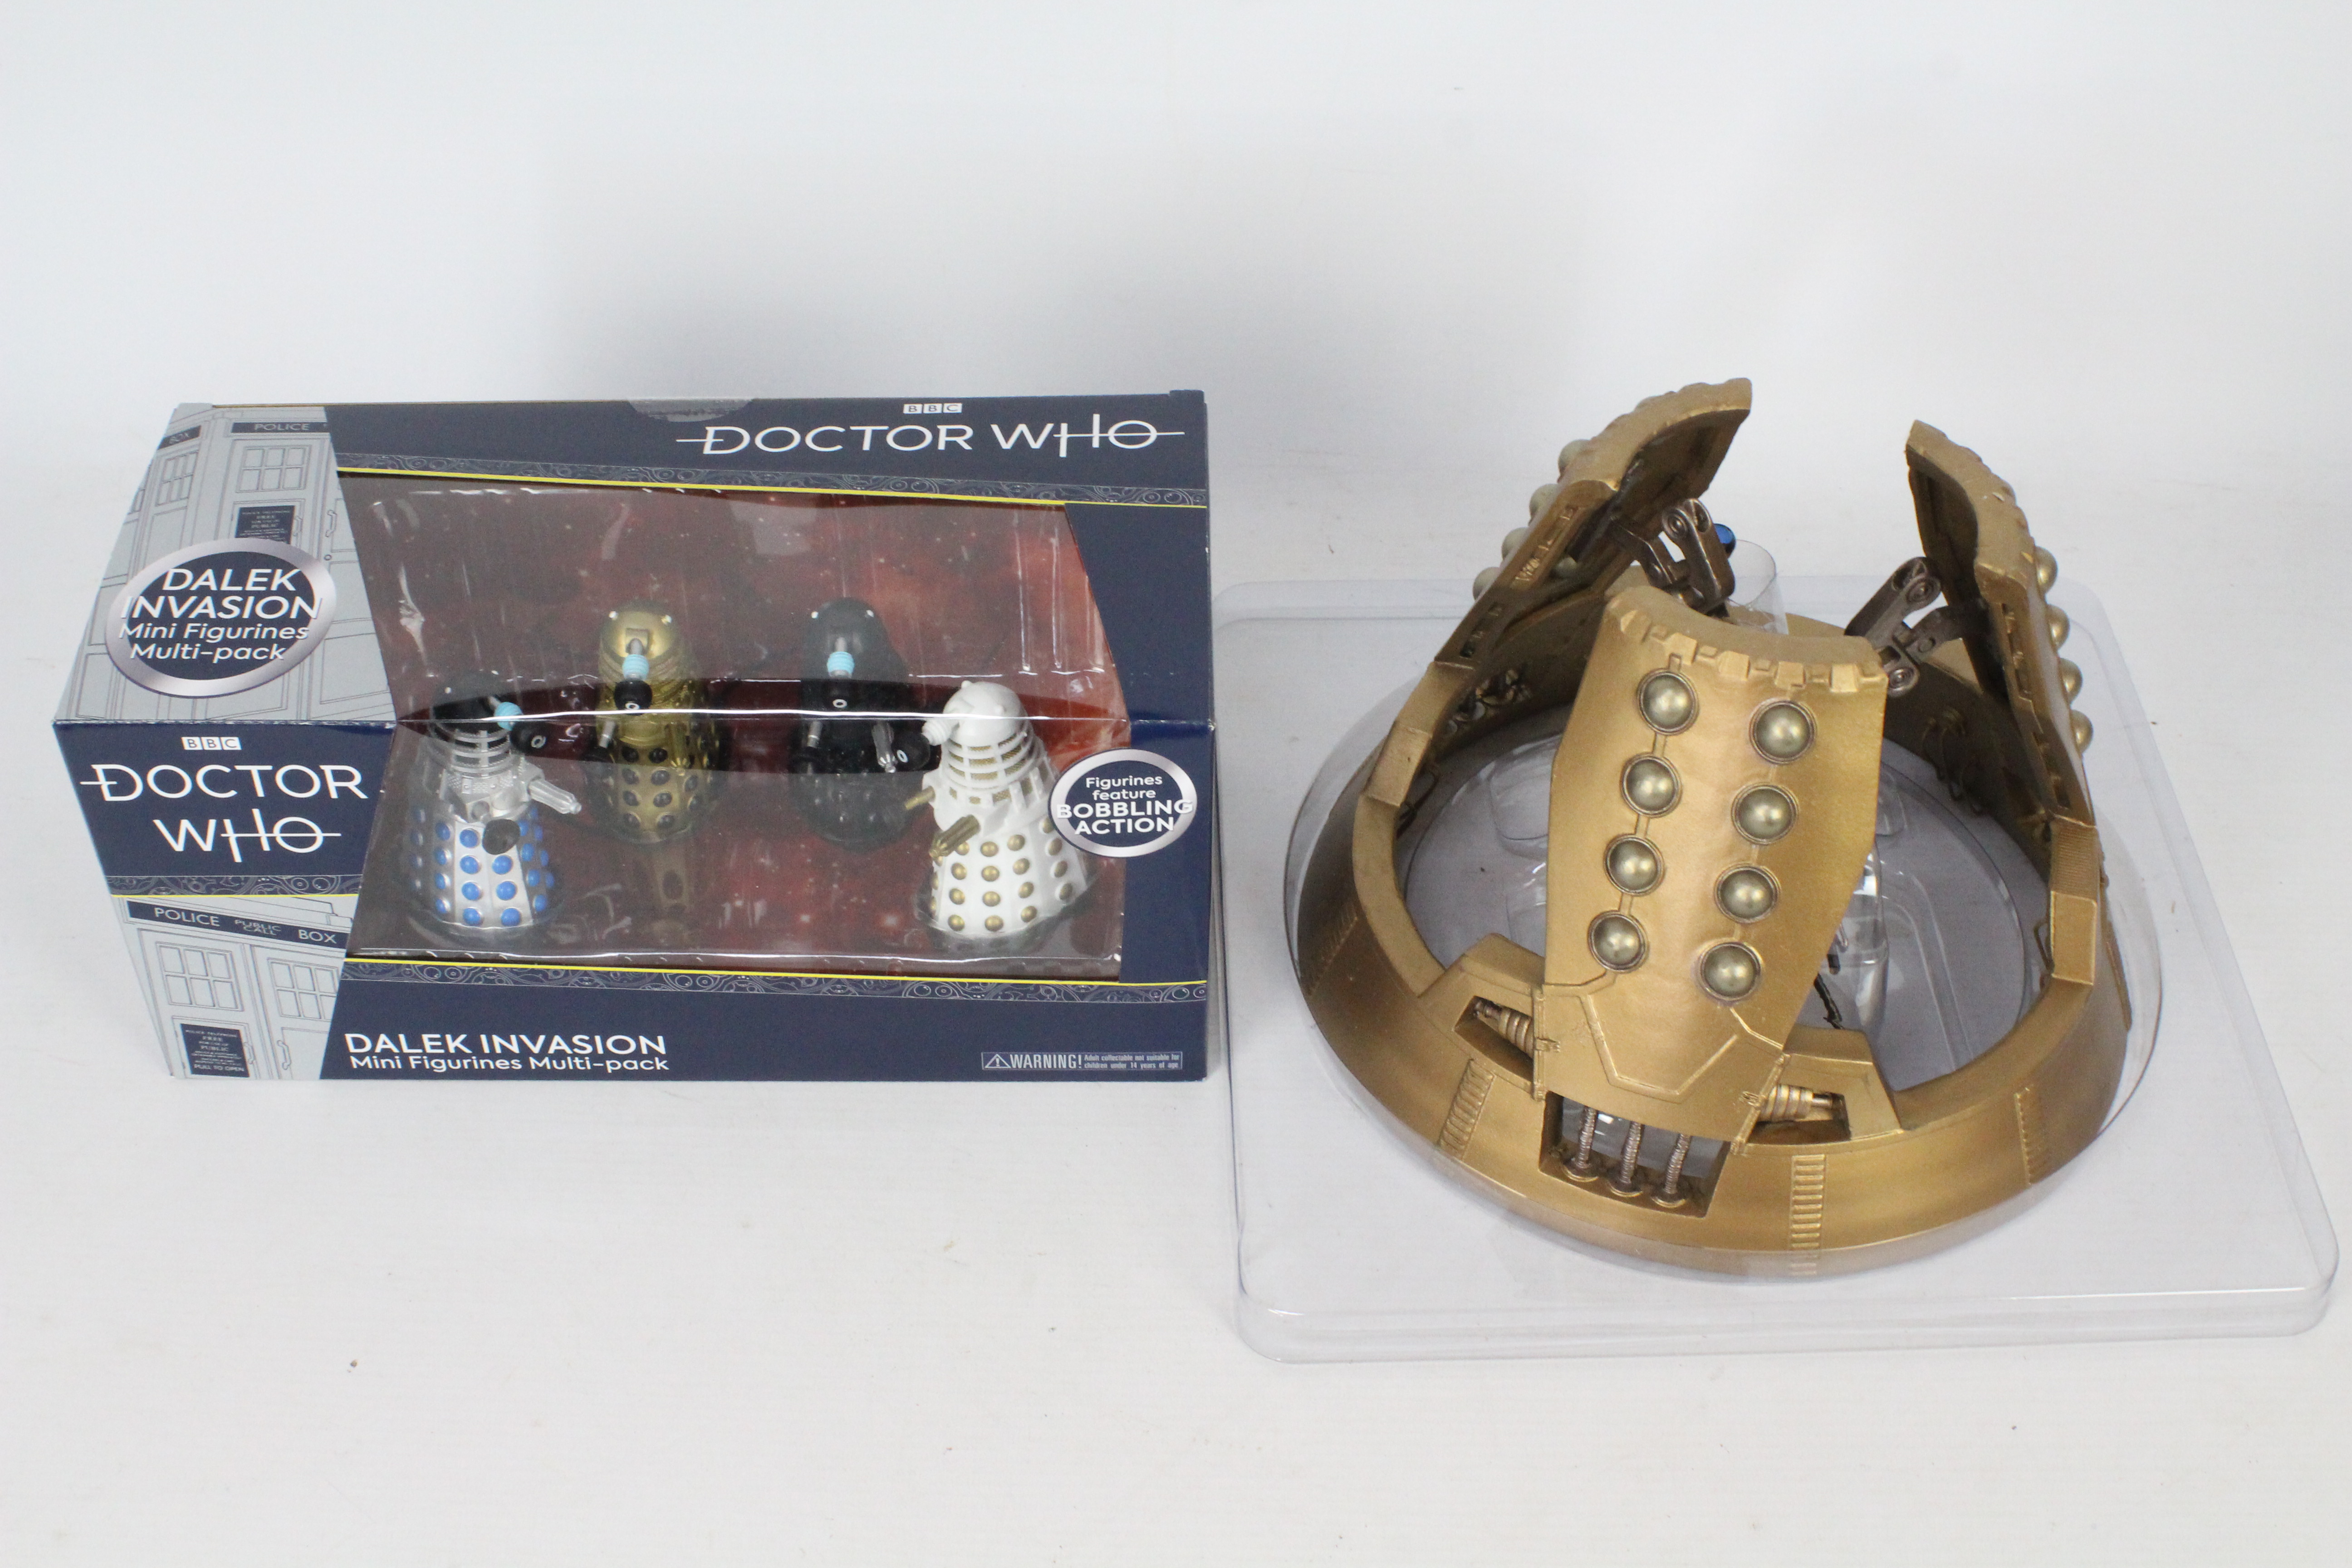 Eaglemoss, Big Chief Studios, BBC - Two boxed Doctor Who themed action figure sets.